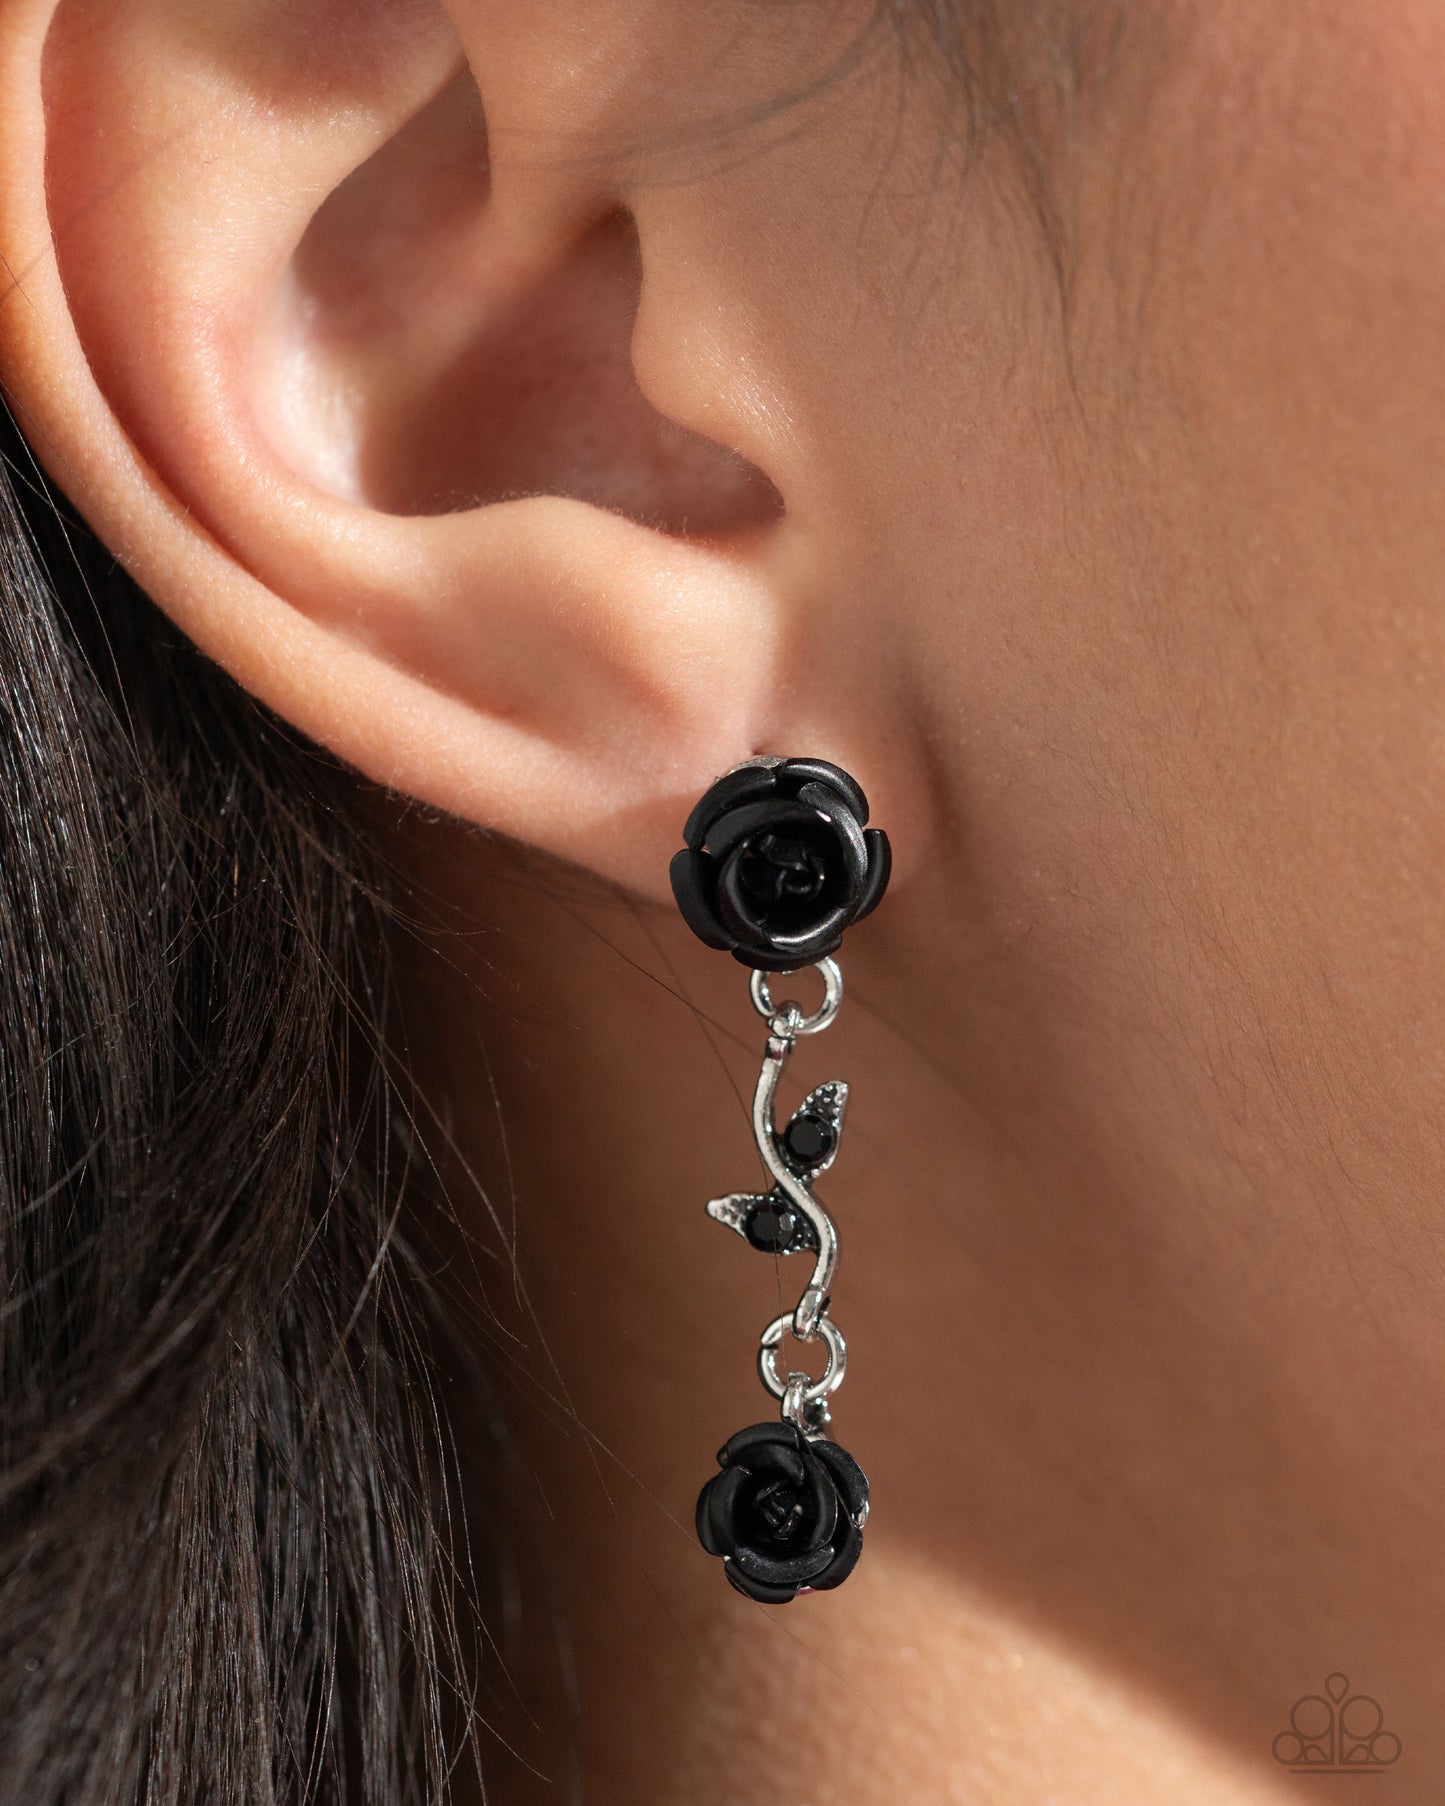 Led by the ROSE - Black Earring